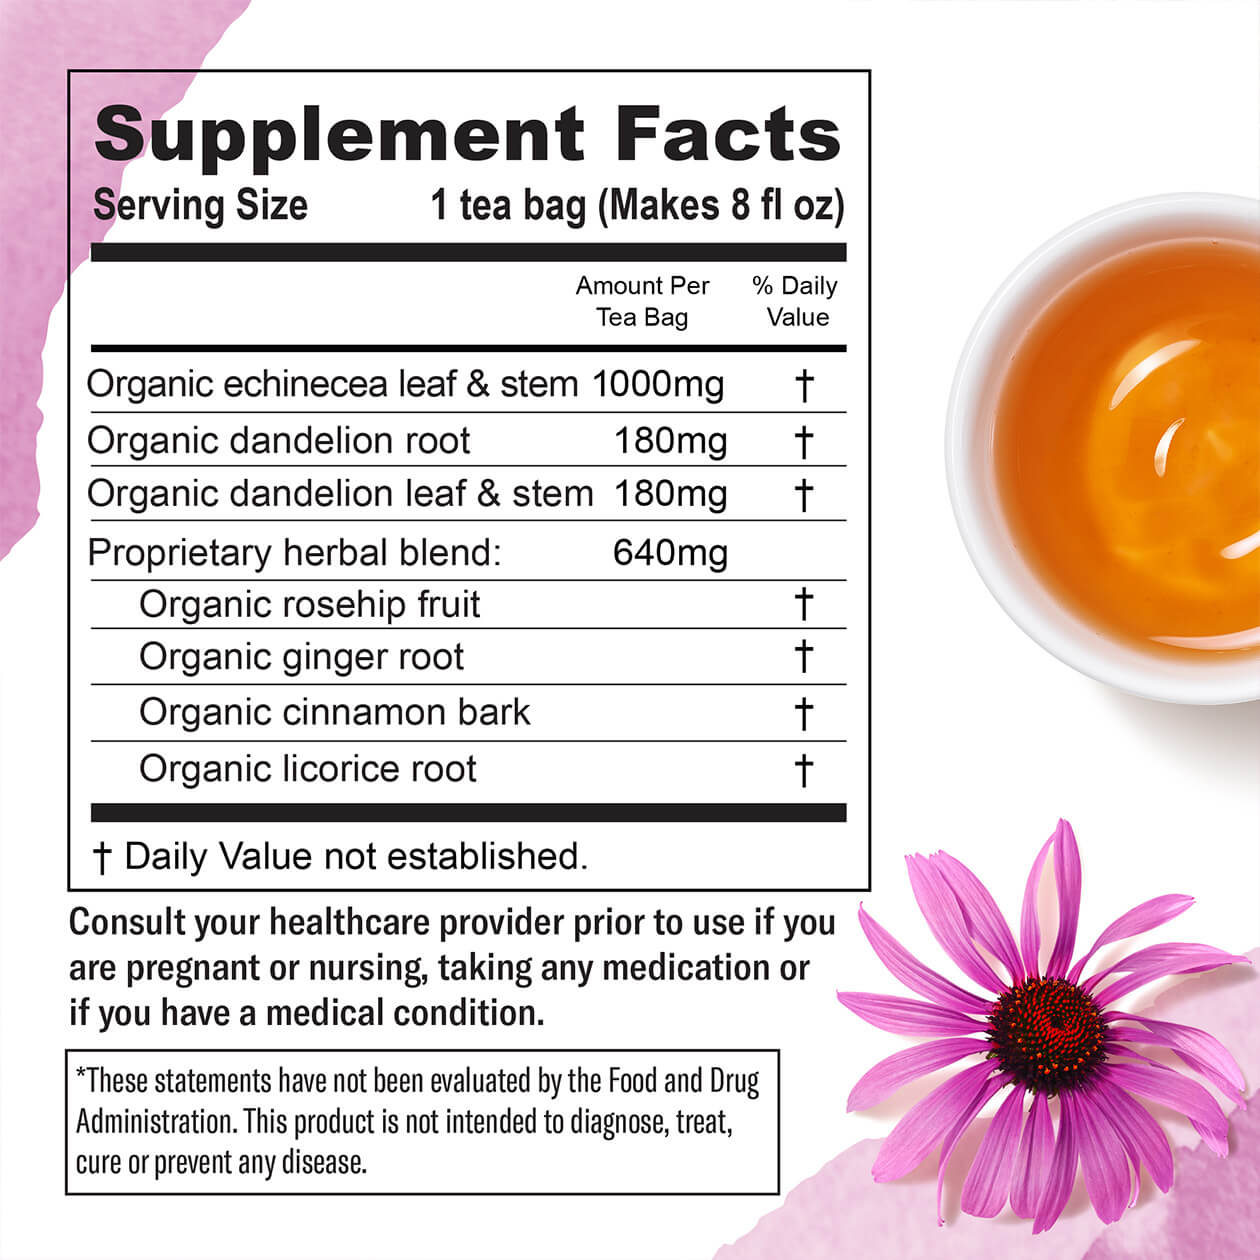 The supplement facts for Numi's Immune Boost dietary supplement tea